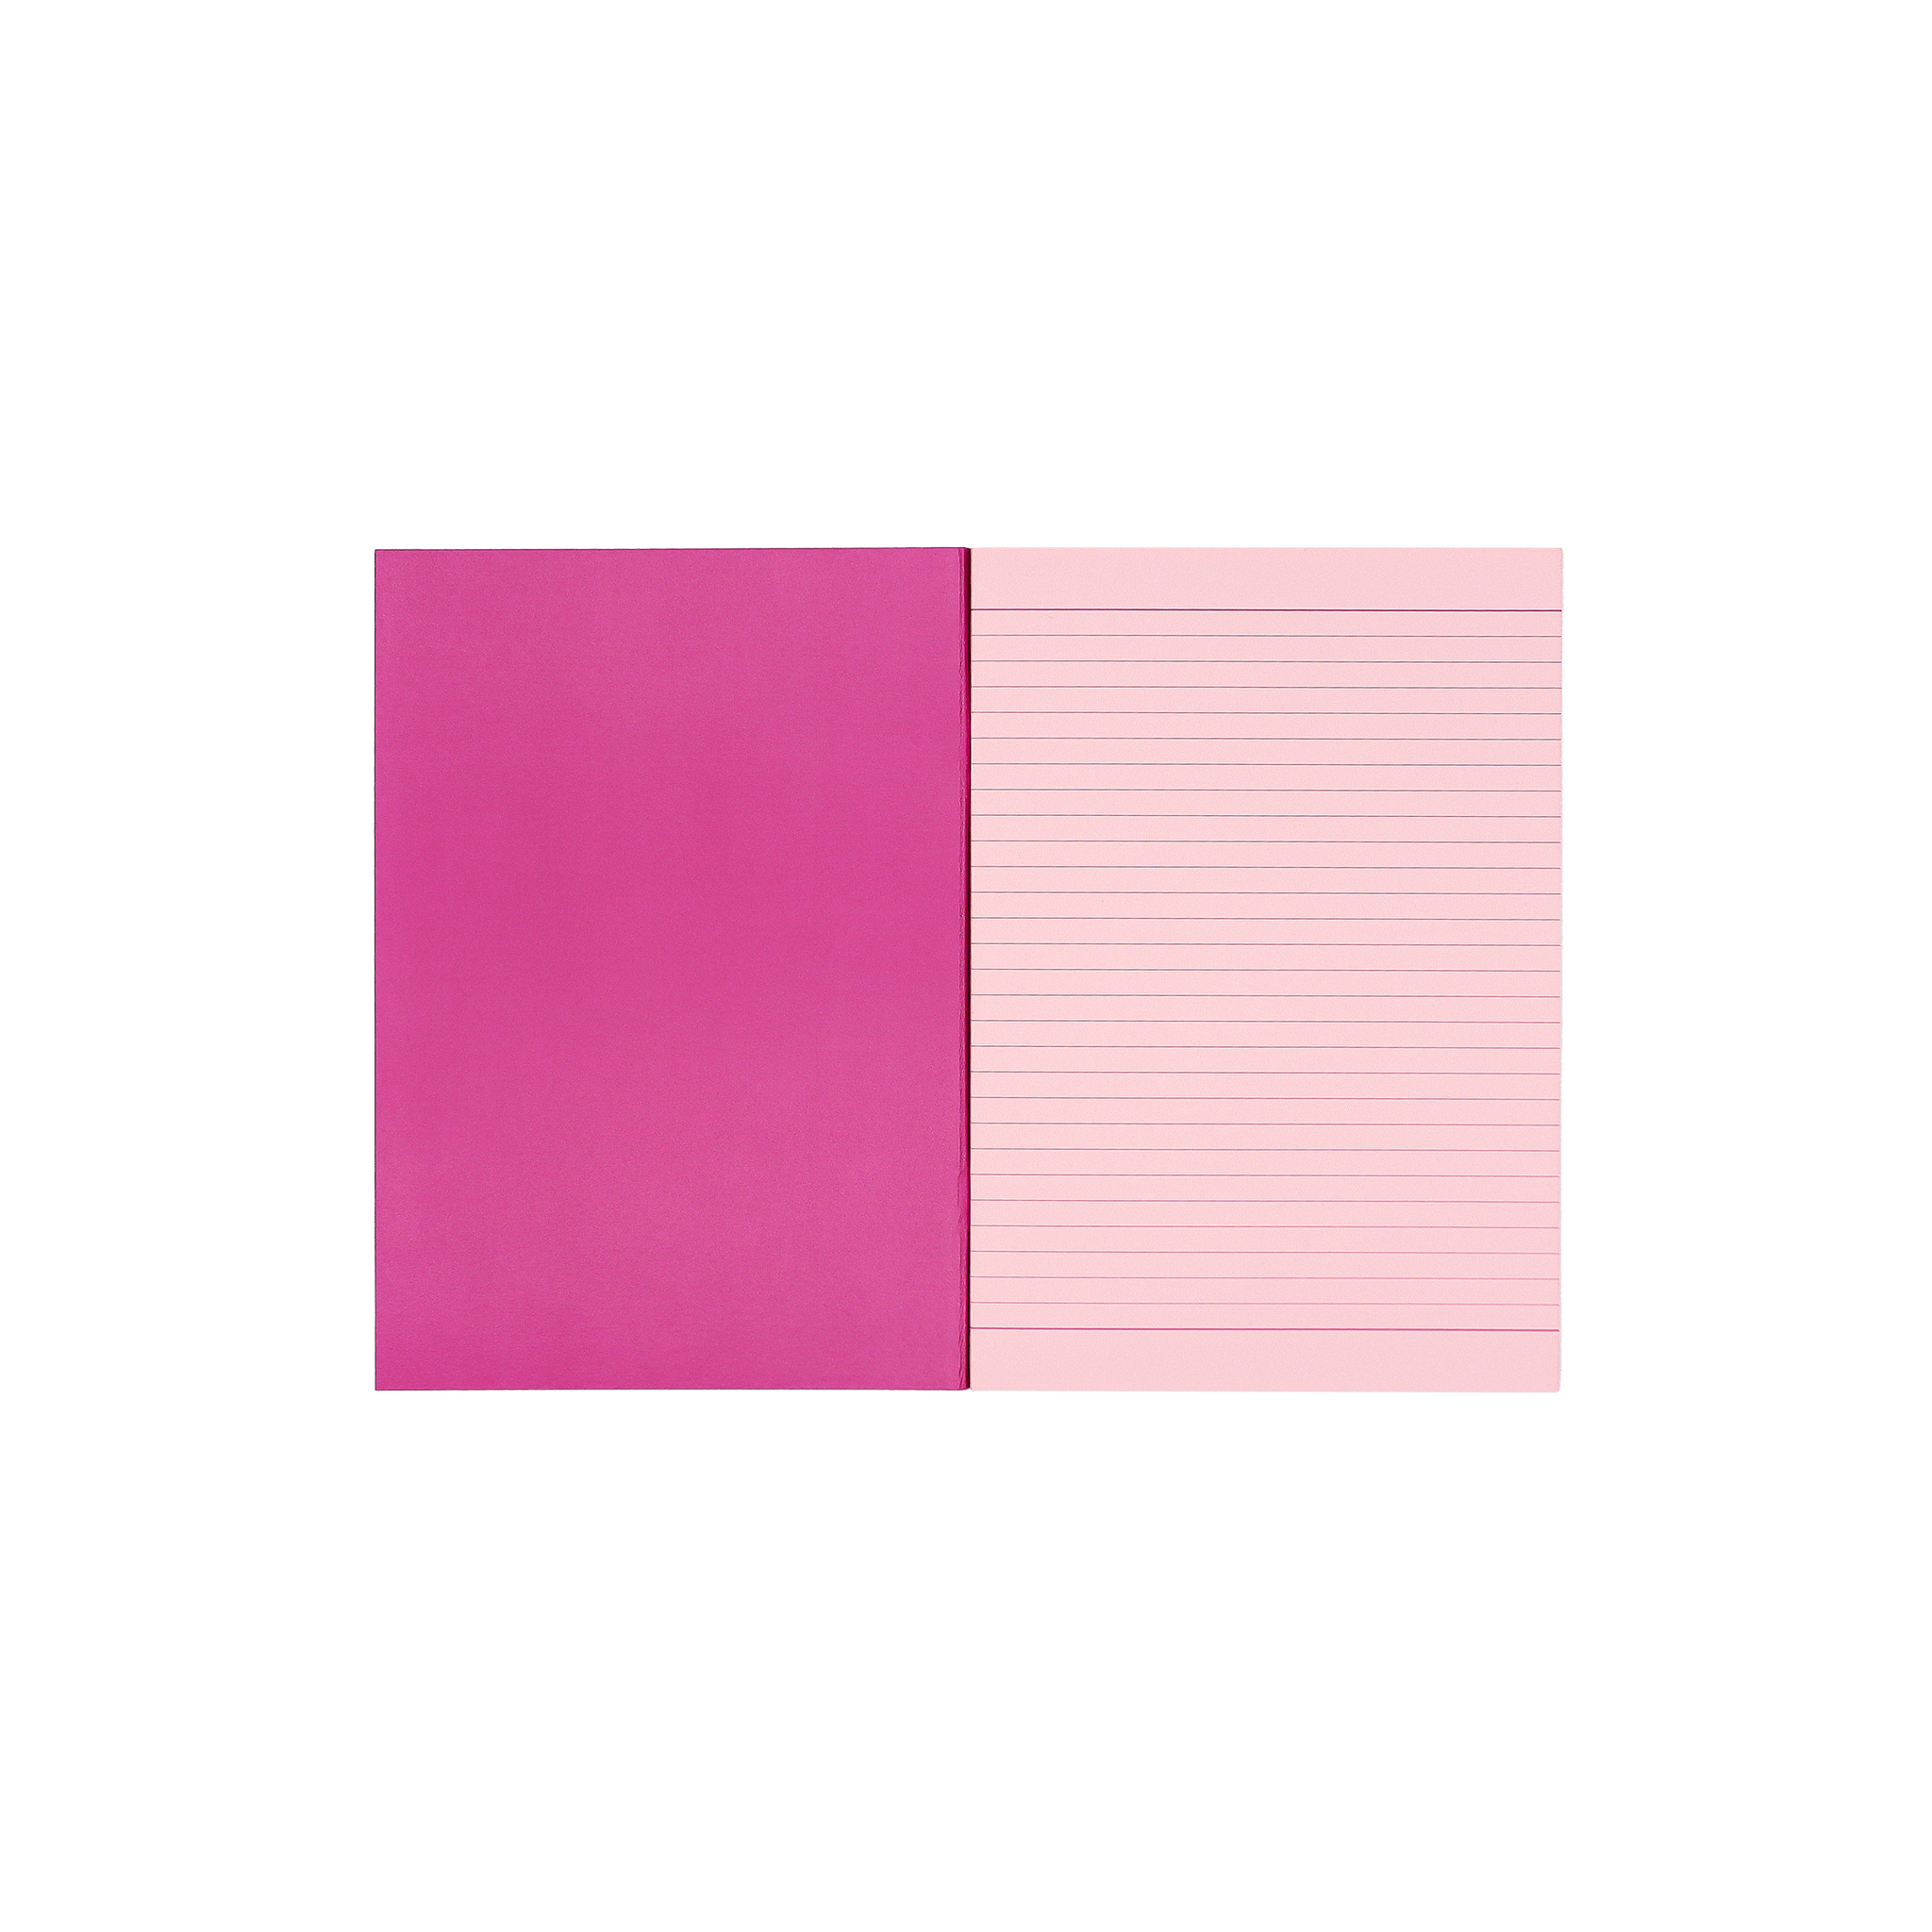 Socolo notebook, open showing its pink paper pages, lined with pink ink, and dark pink inner cover. 